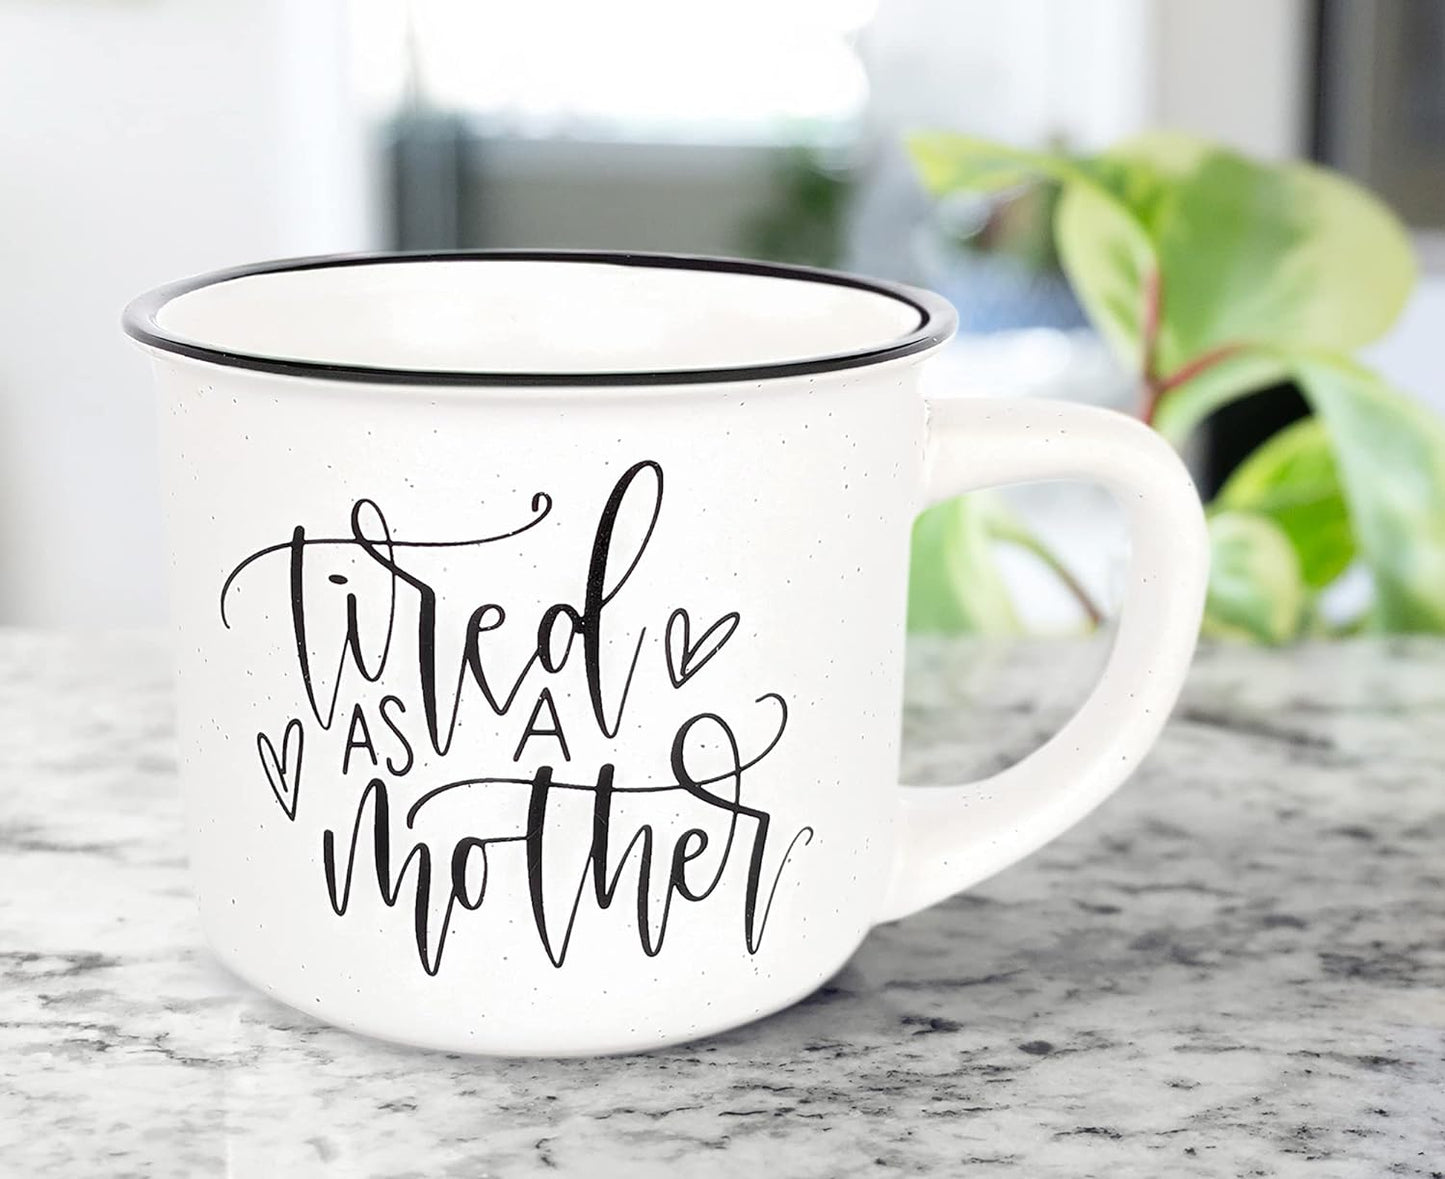 June & Lucy Mom Mug with Stylish Box- Tired as a Mother Novelty Mugs for Mom Cute Large Camping Coffee Mugs for Women - White Coffee Mug with Lettering - 15 oz Microwave and Dishwasher Safe